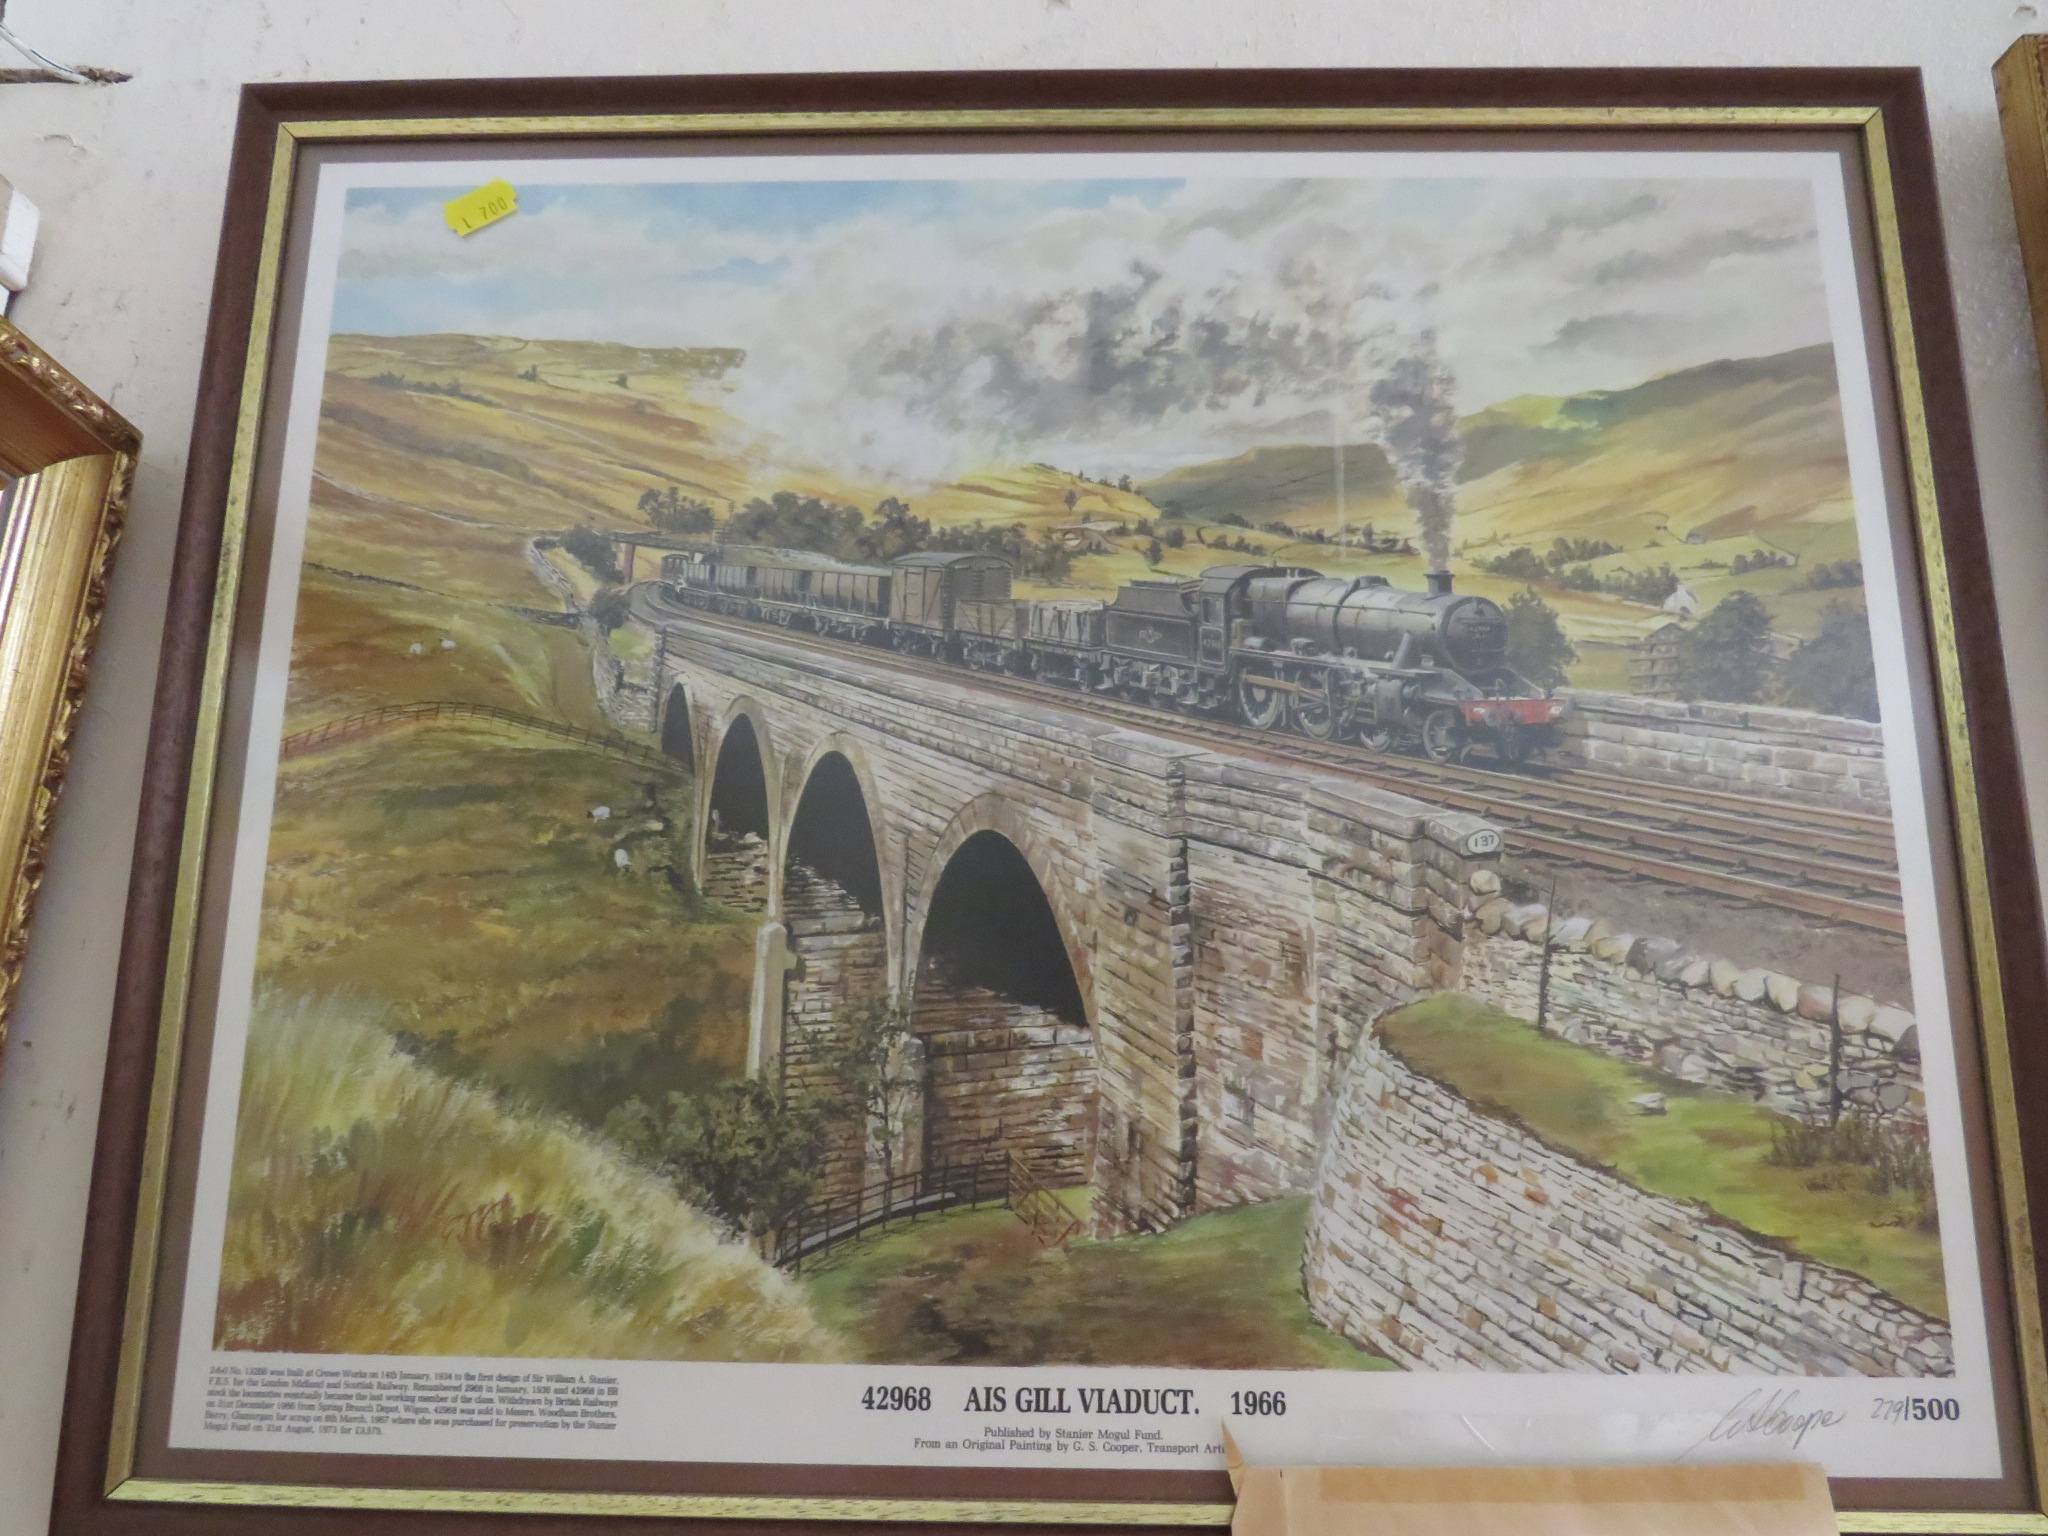 FRAMED AND MOUNTED PICTURE OF LOCOMOTIVE 'SNOWDON MOUNTAIN RAILWAY', TOGETHER WITH LIMITED EDITION - Image 3 of 3